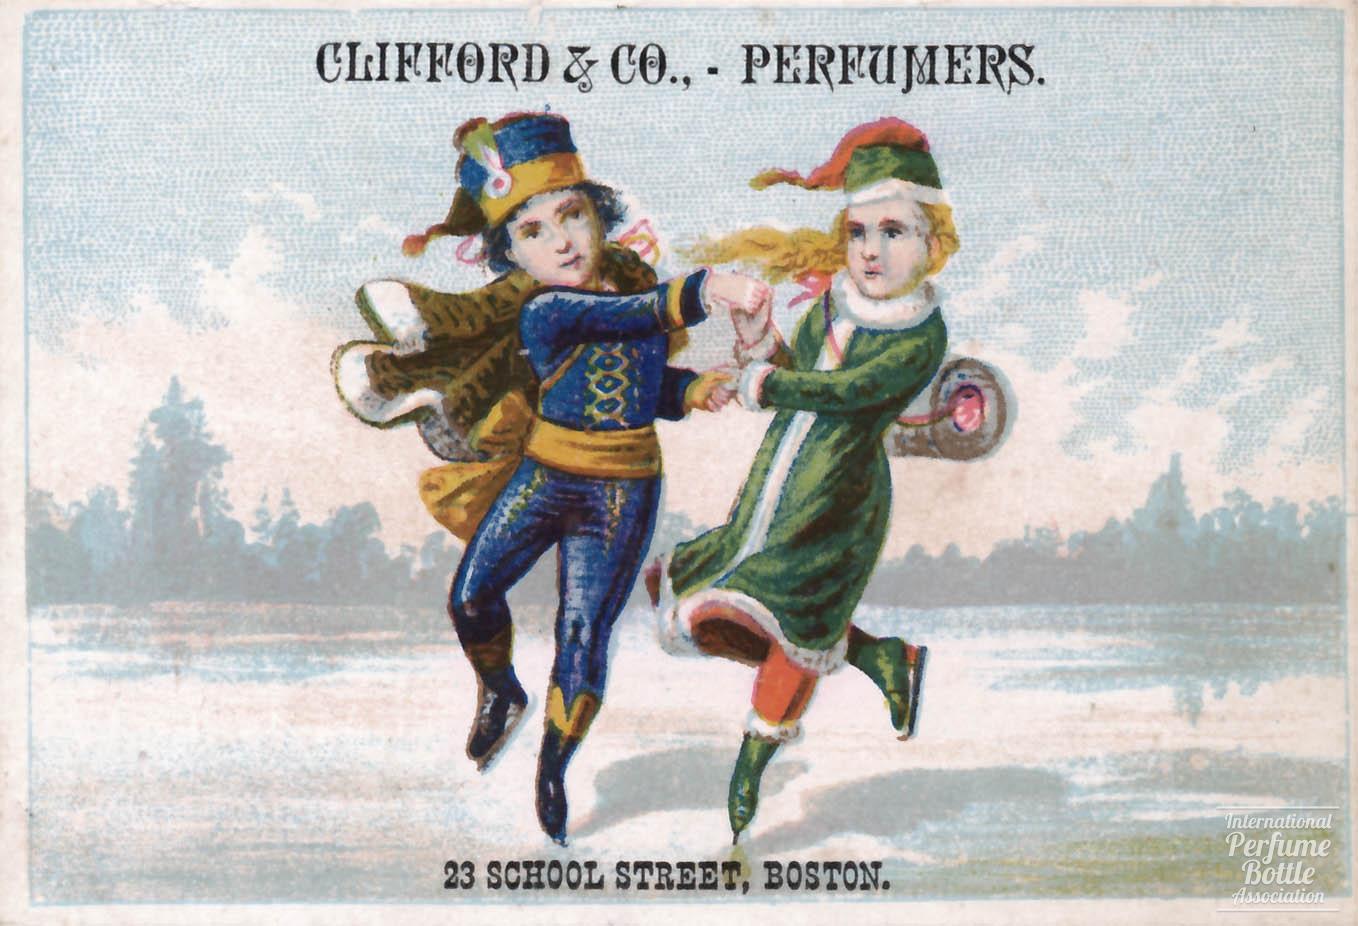 Trade Card by Clifford & Co. Perfumers